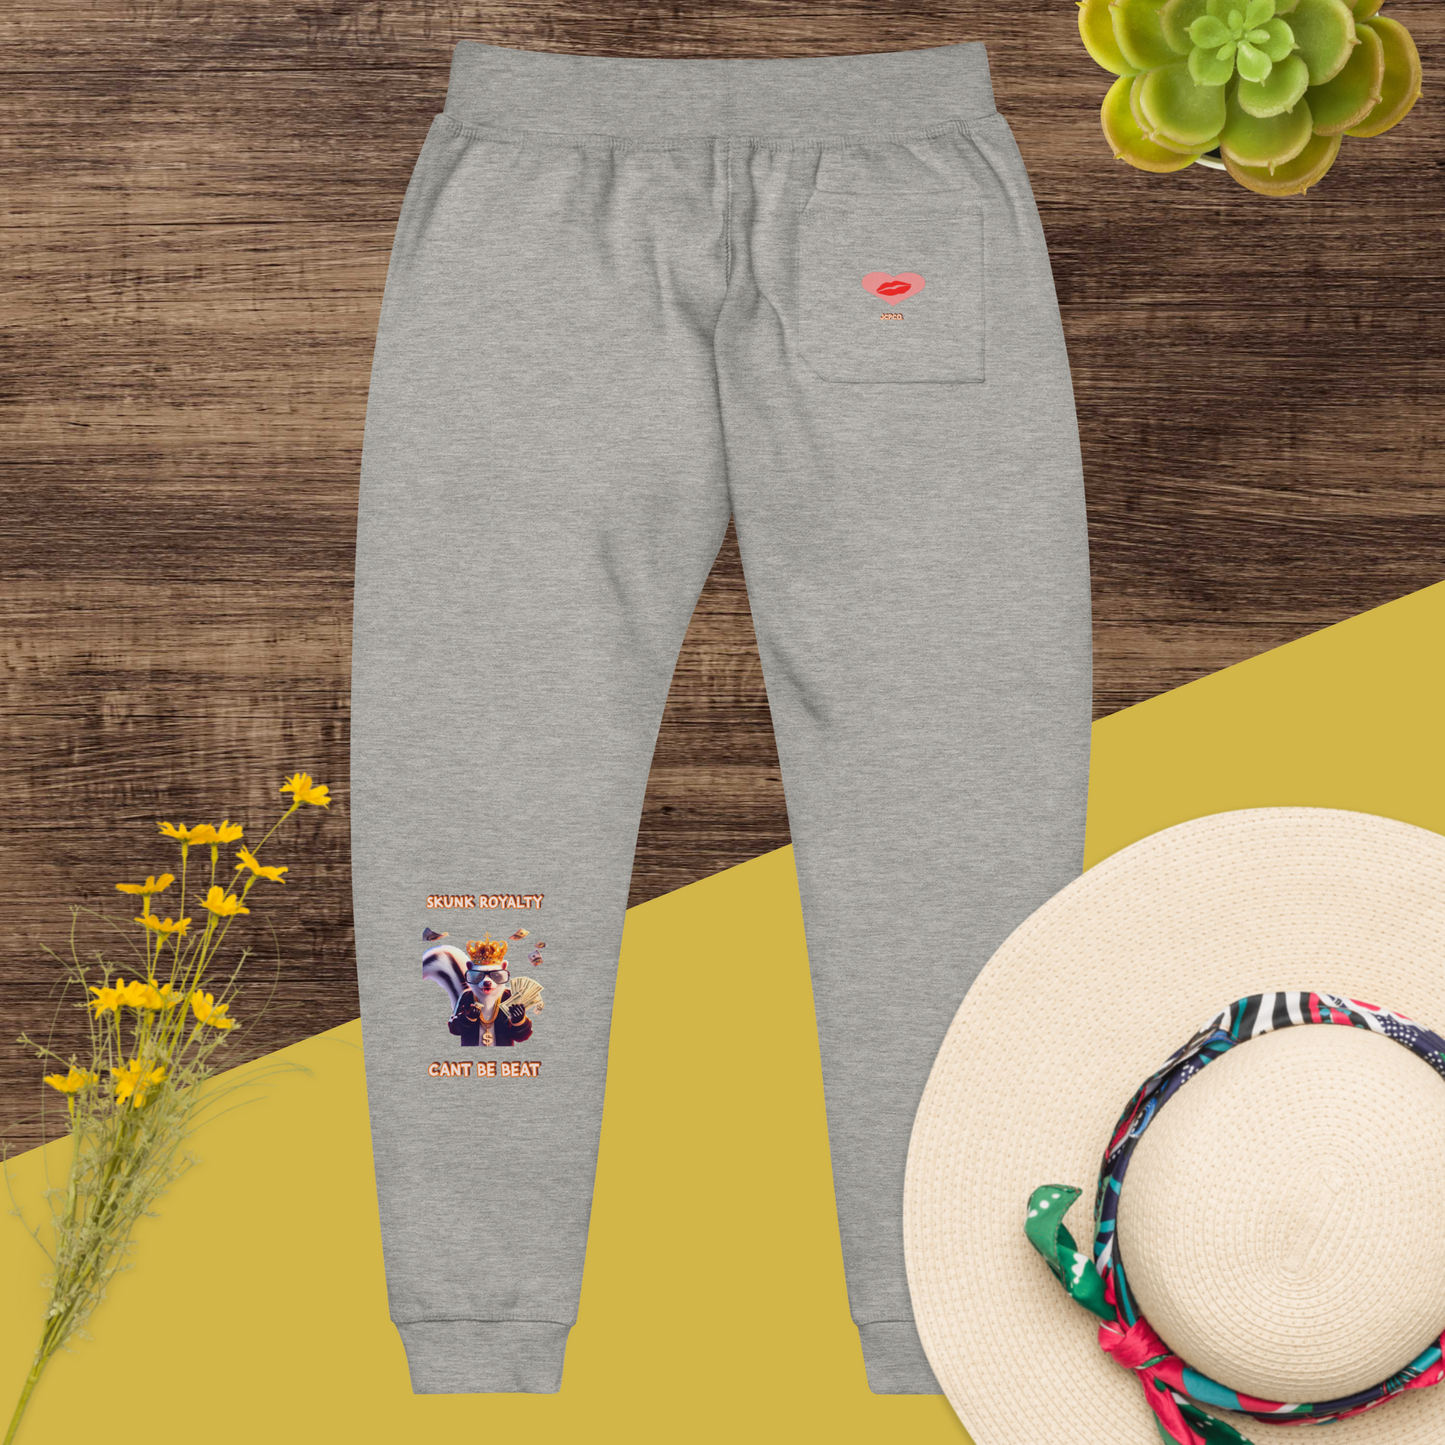 👑Skunk Swagger 🦨Skunk Royalty Can't Be Beat Aromas Crowned💎Unisex fleece sweatpants👖